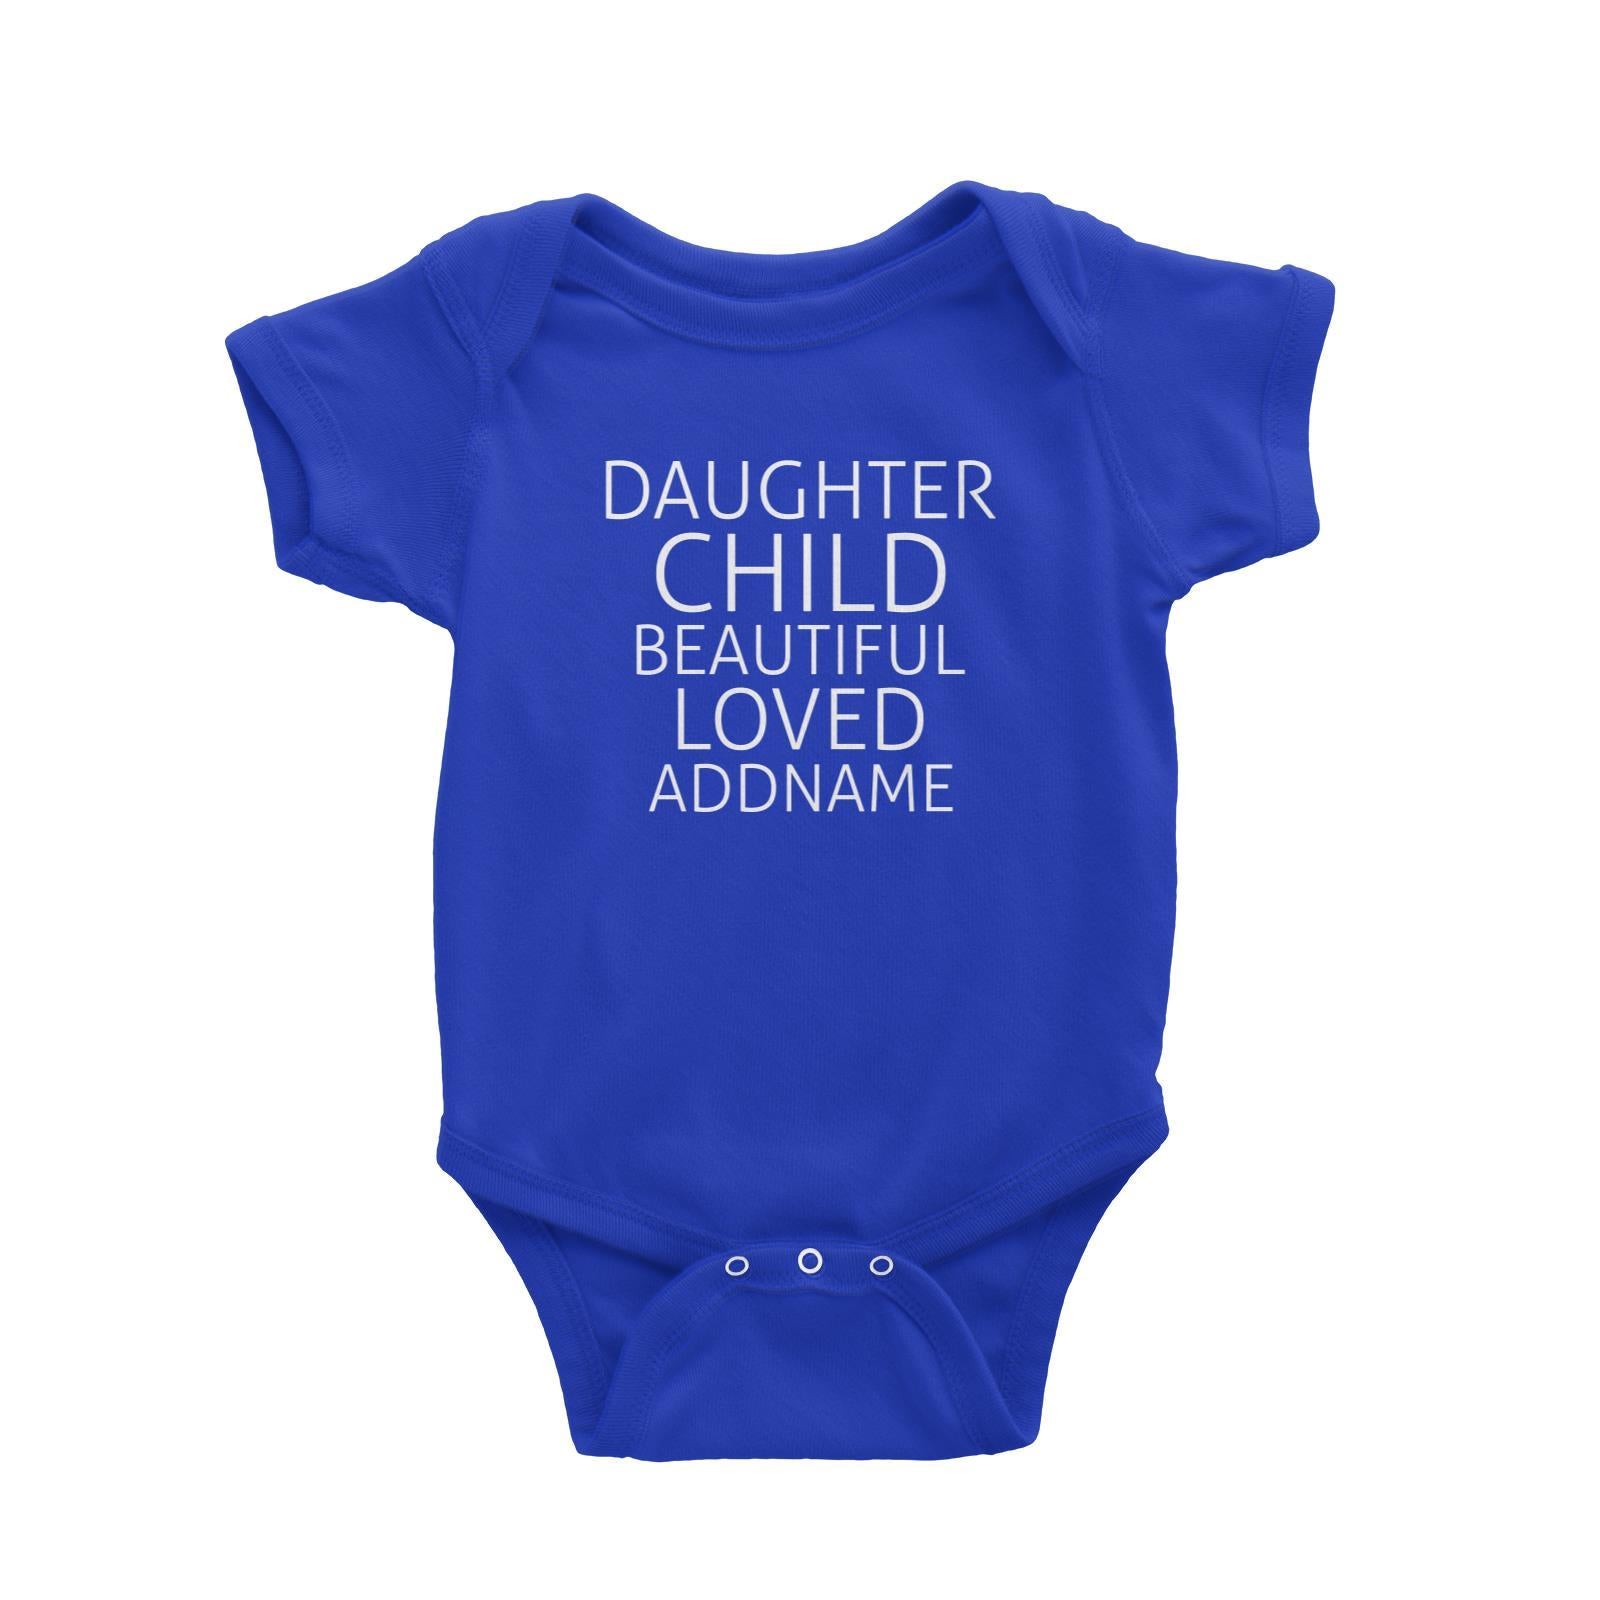 Daughter and Child Baby Romper Personalizable Designs Matching Family Simple